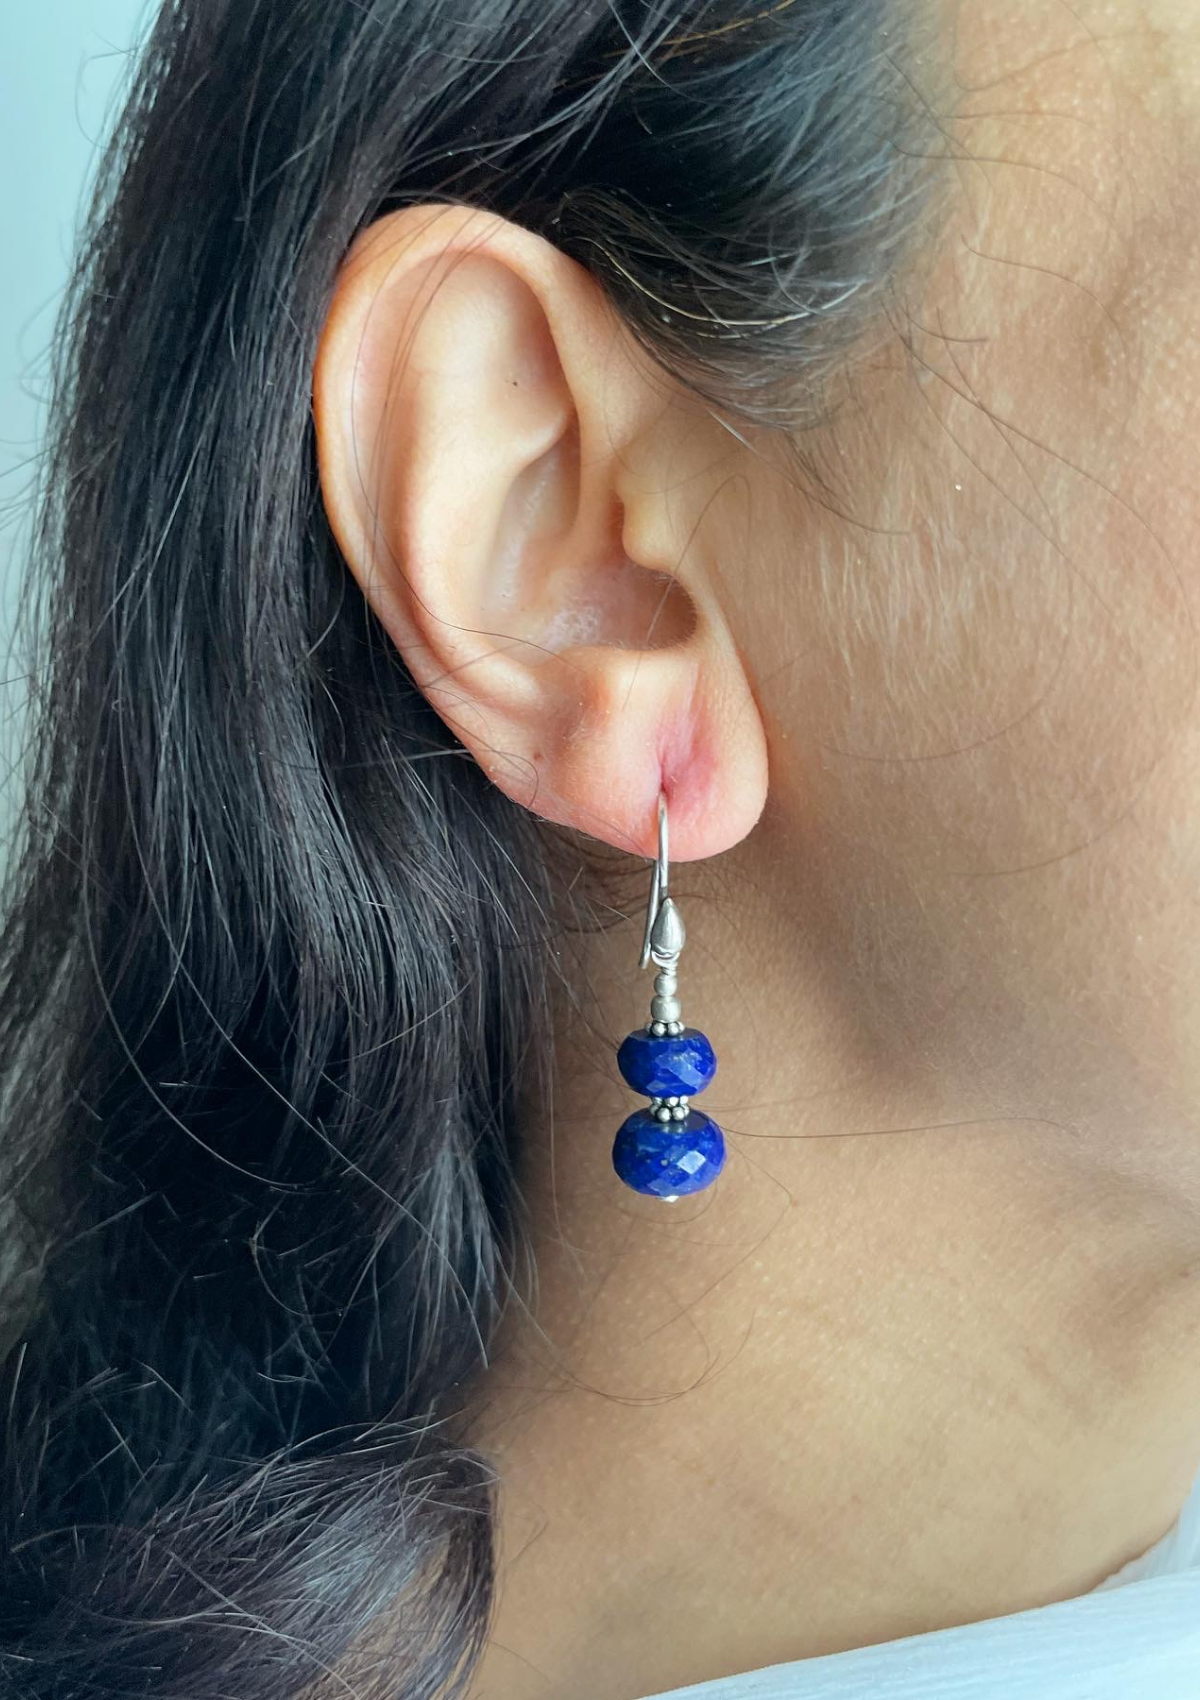 lapis lazuli earrings made with sterling silver and lapis lazuli stone